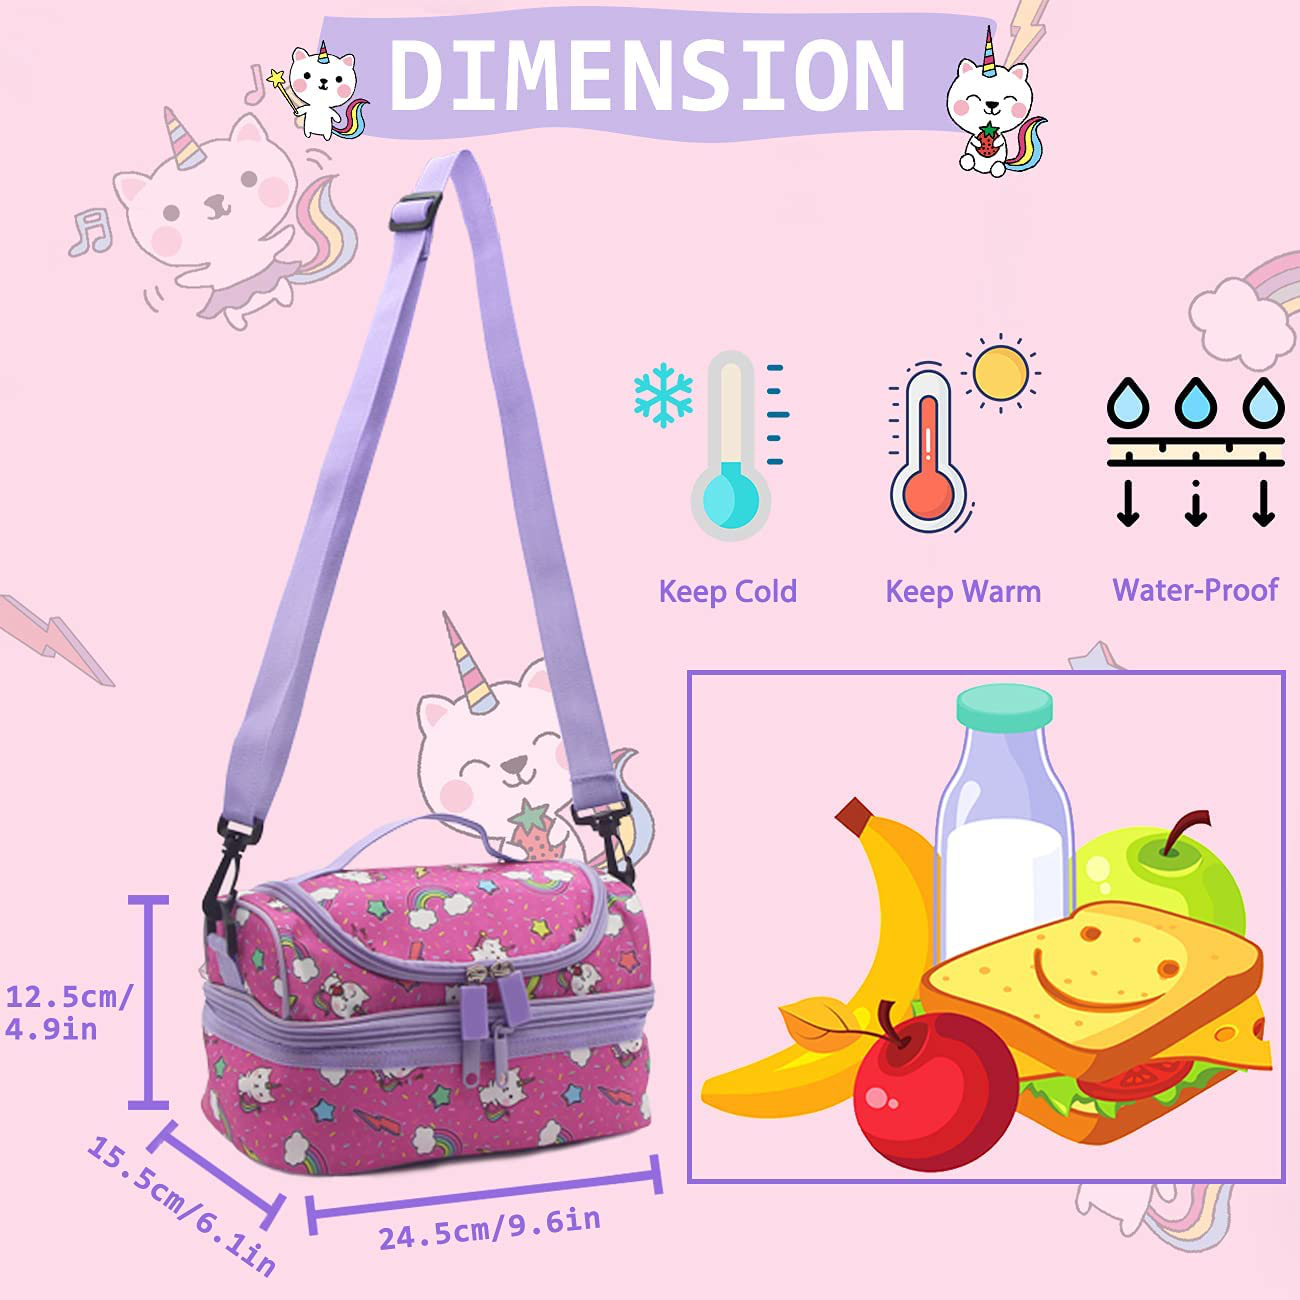 Lunch Bag for Girls,ChaseChic Insulated Lunch Boxes Bag for Kids Lightweight Lunch Organizer Leak-Proof Cooler Bag in Dual Compartment with Detachable Adjustable Shoulder Strap 3-18Years,Pink Cat